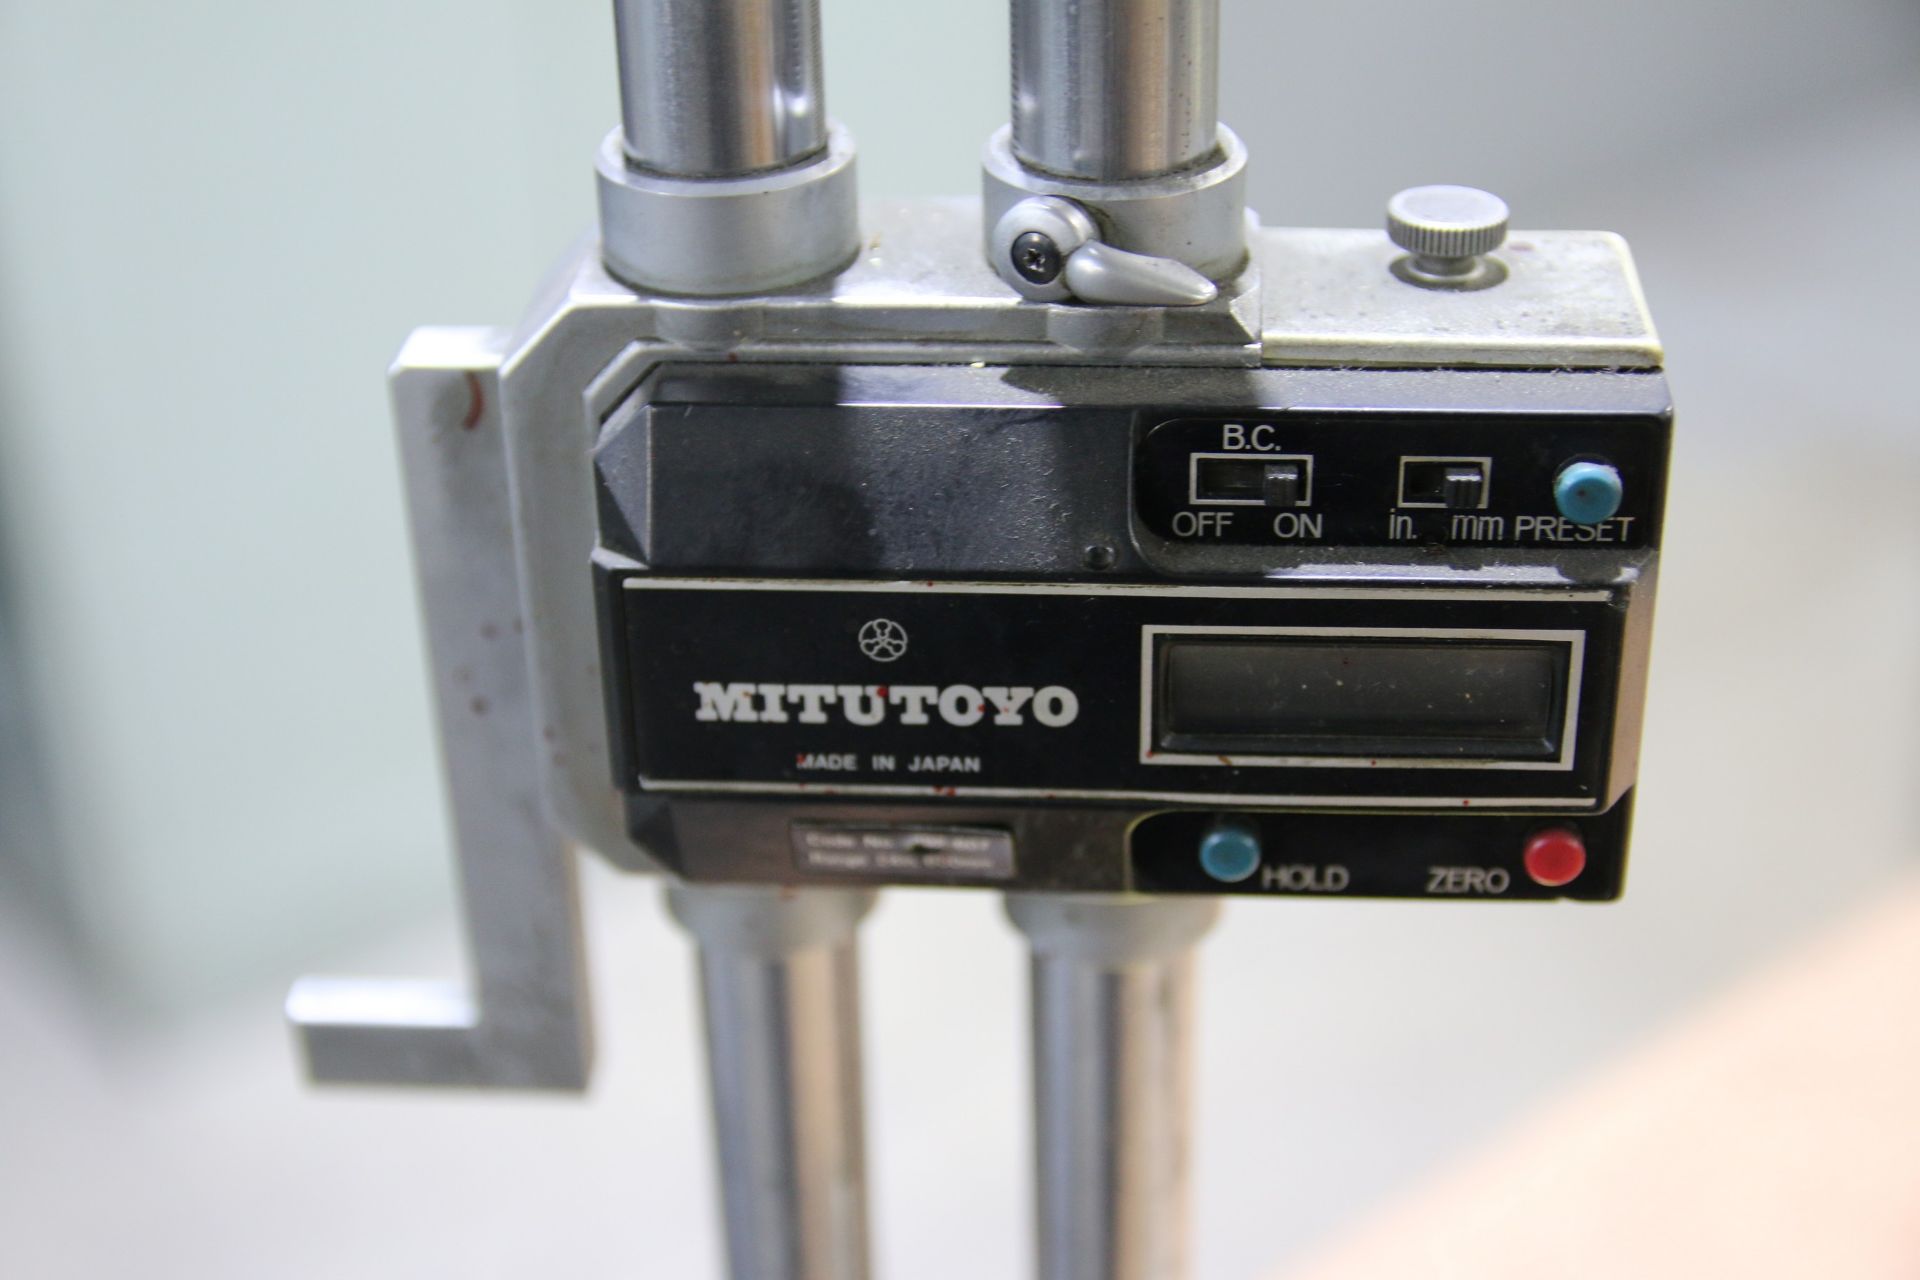 Set of Digital Height Gauges (1) Mitutoyo and (1) Fowler - Image 3 of 3